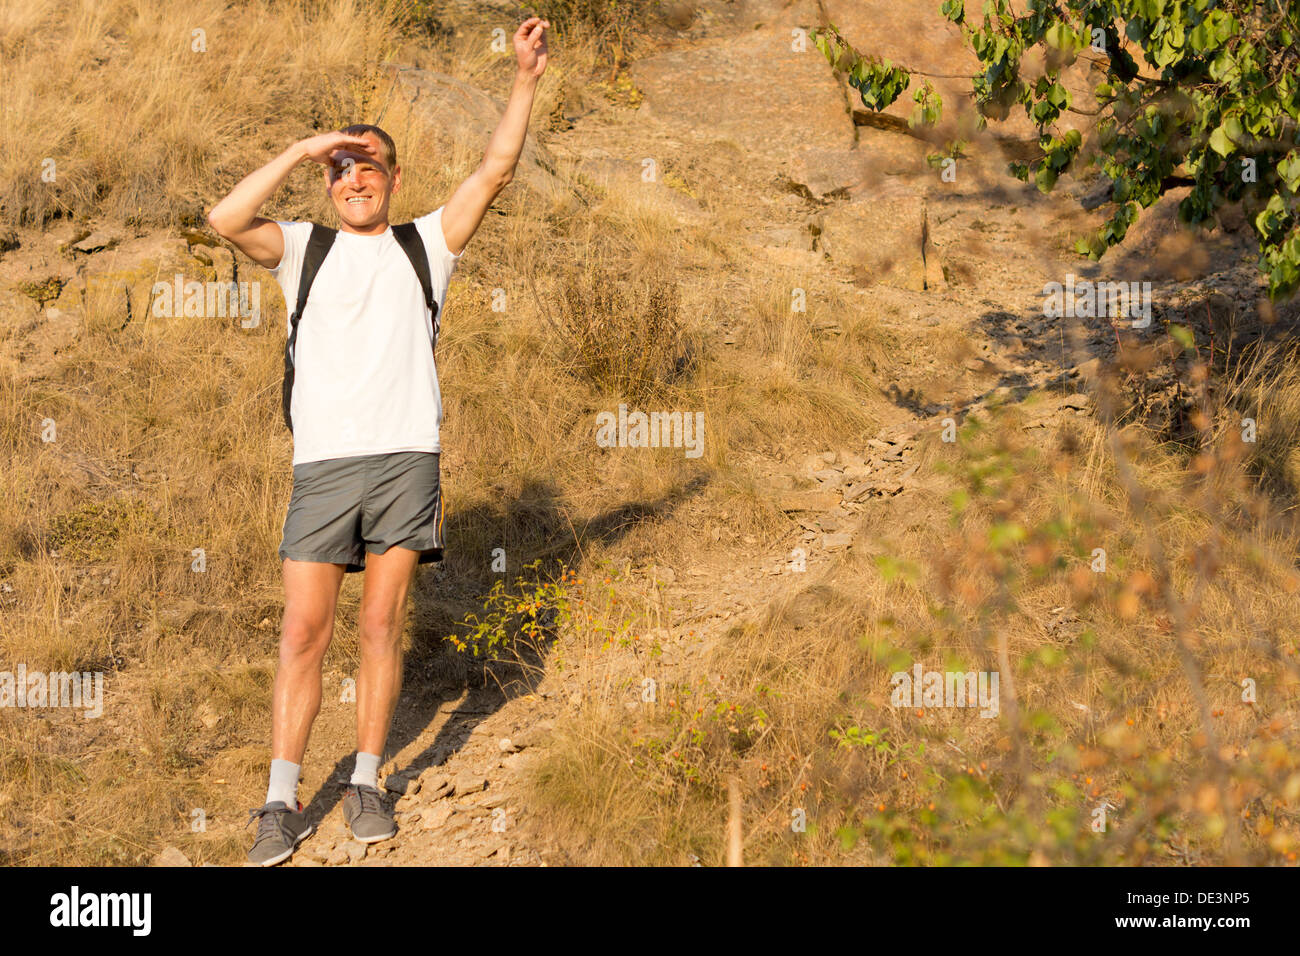 Male backpacker standing waving on a mountains slope with a broad smile to show his enjoyment of hiking in nature in the summer Stock Photo